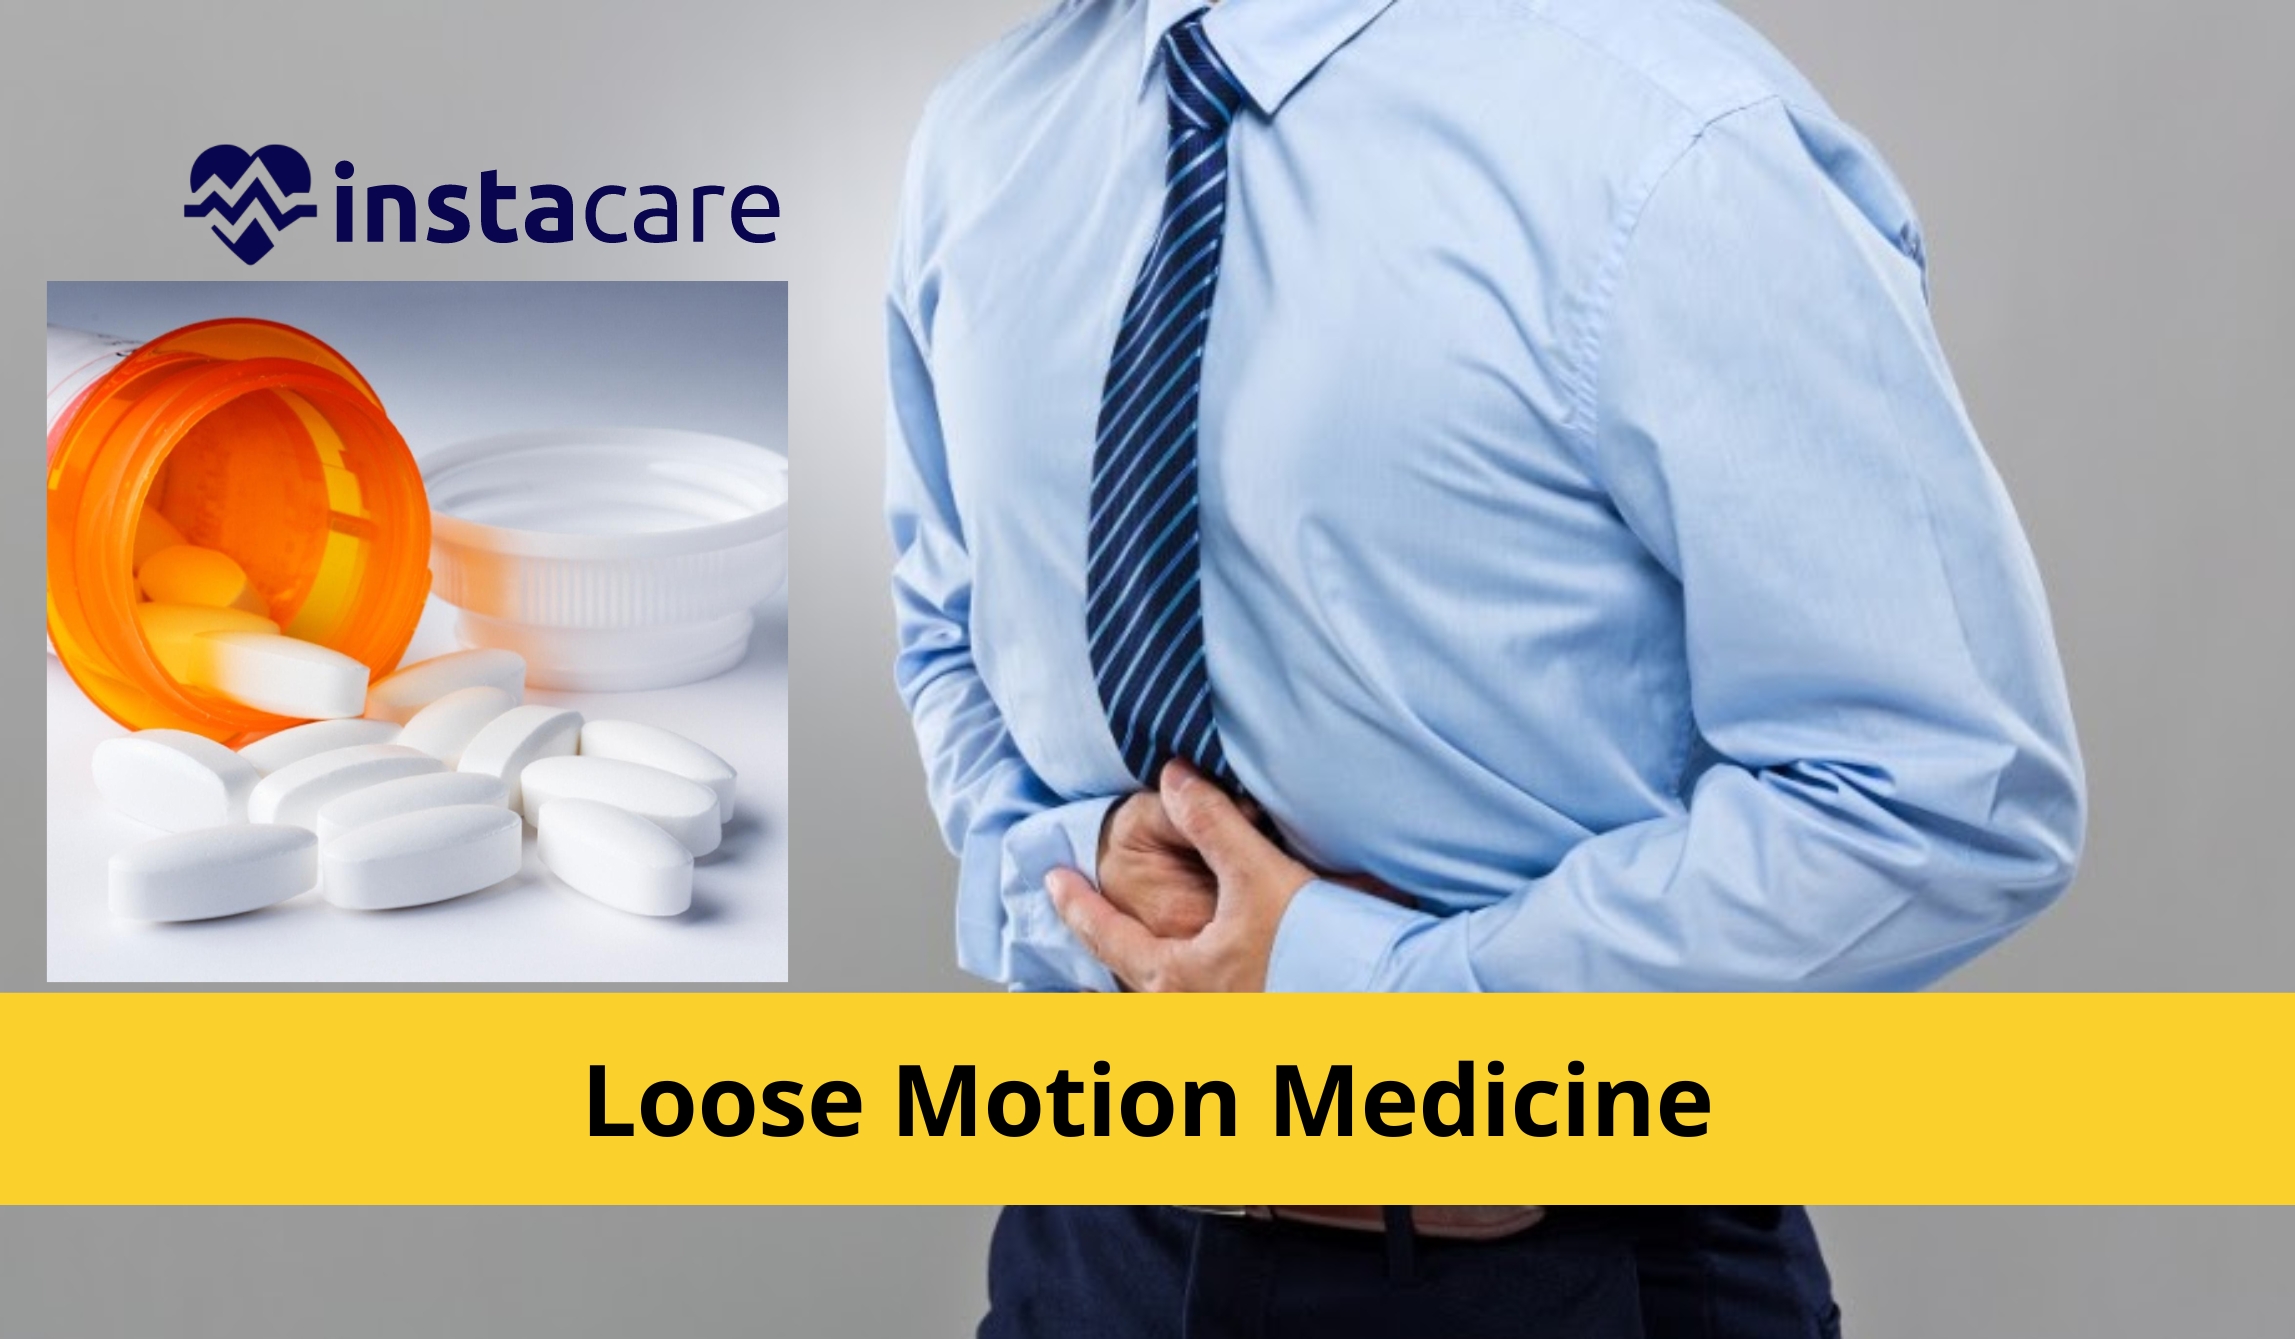 6 Loose Motion Medicine In Pakistan - Uses, Price, Side Effects